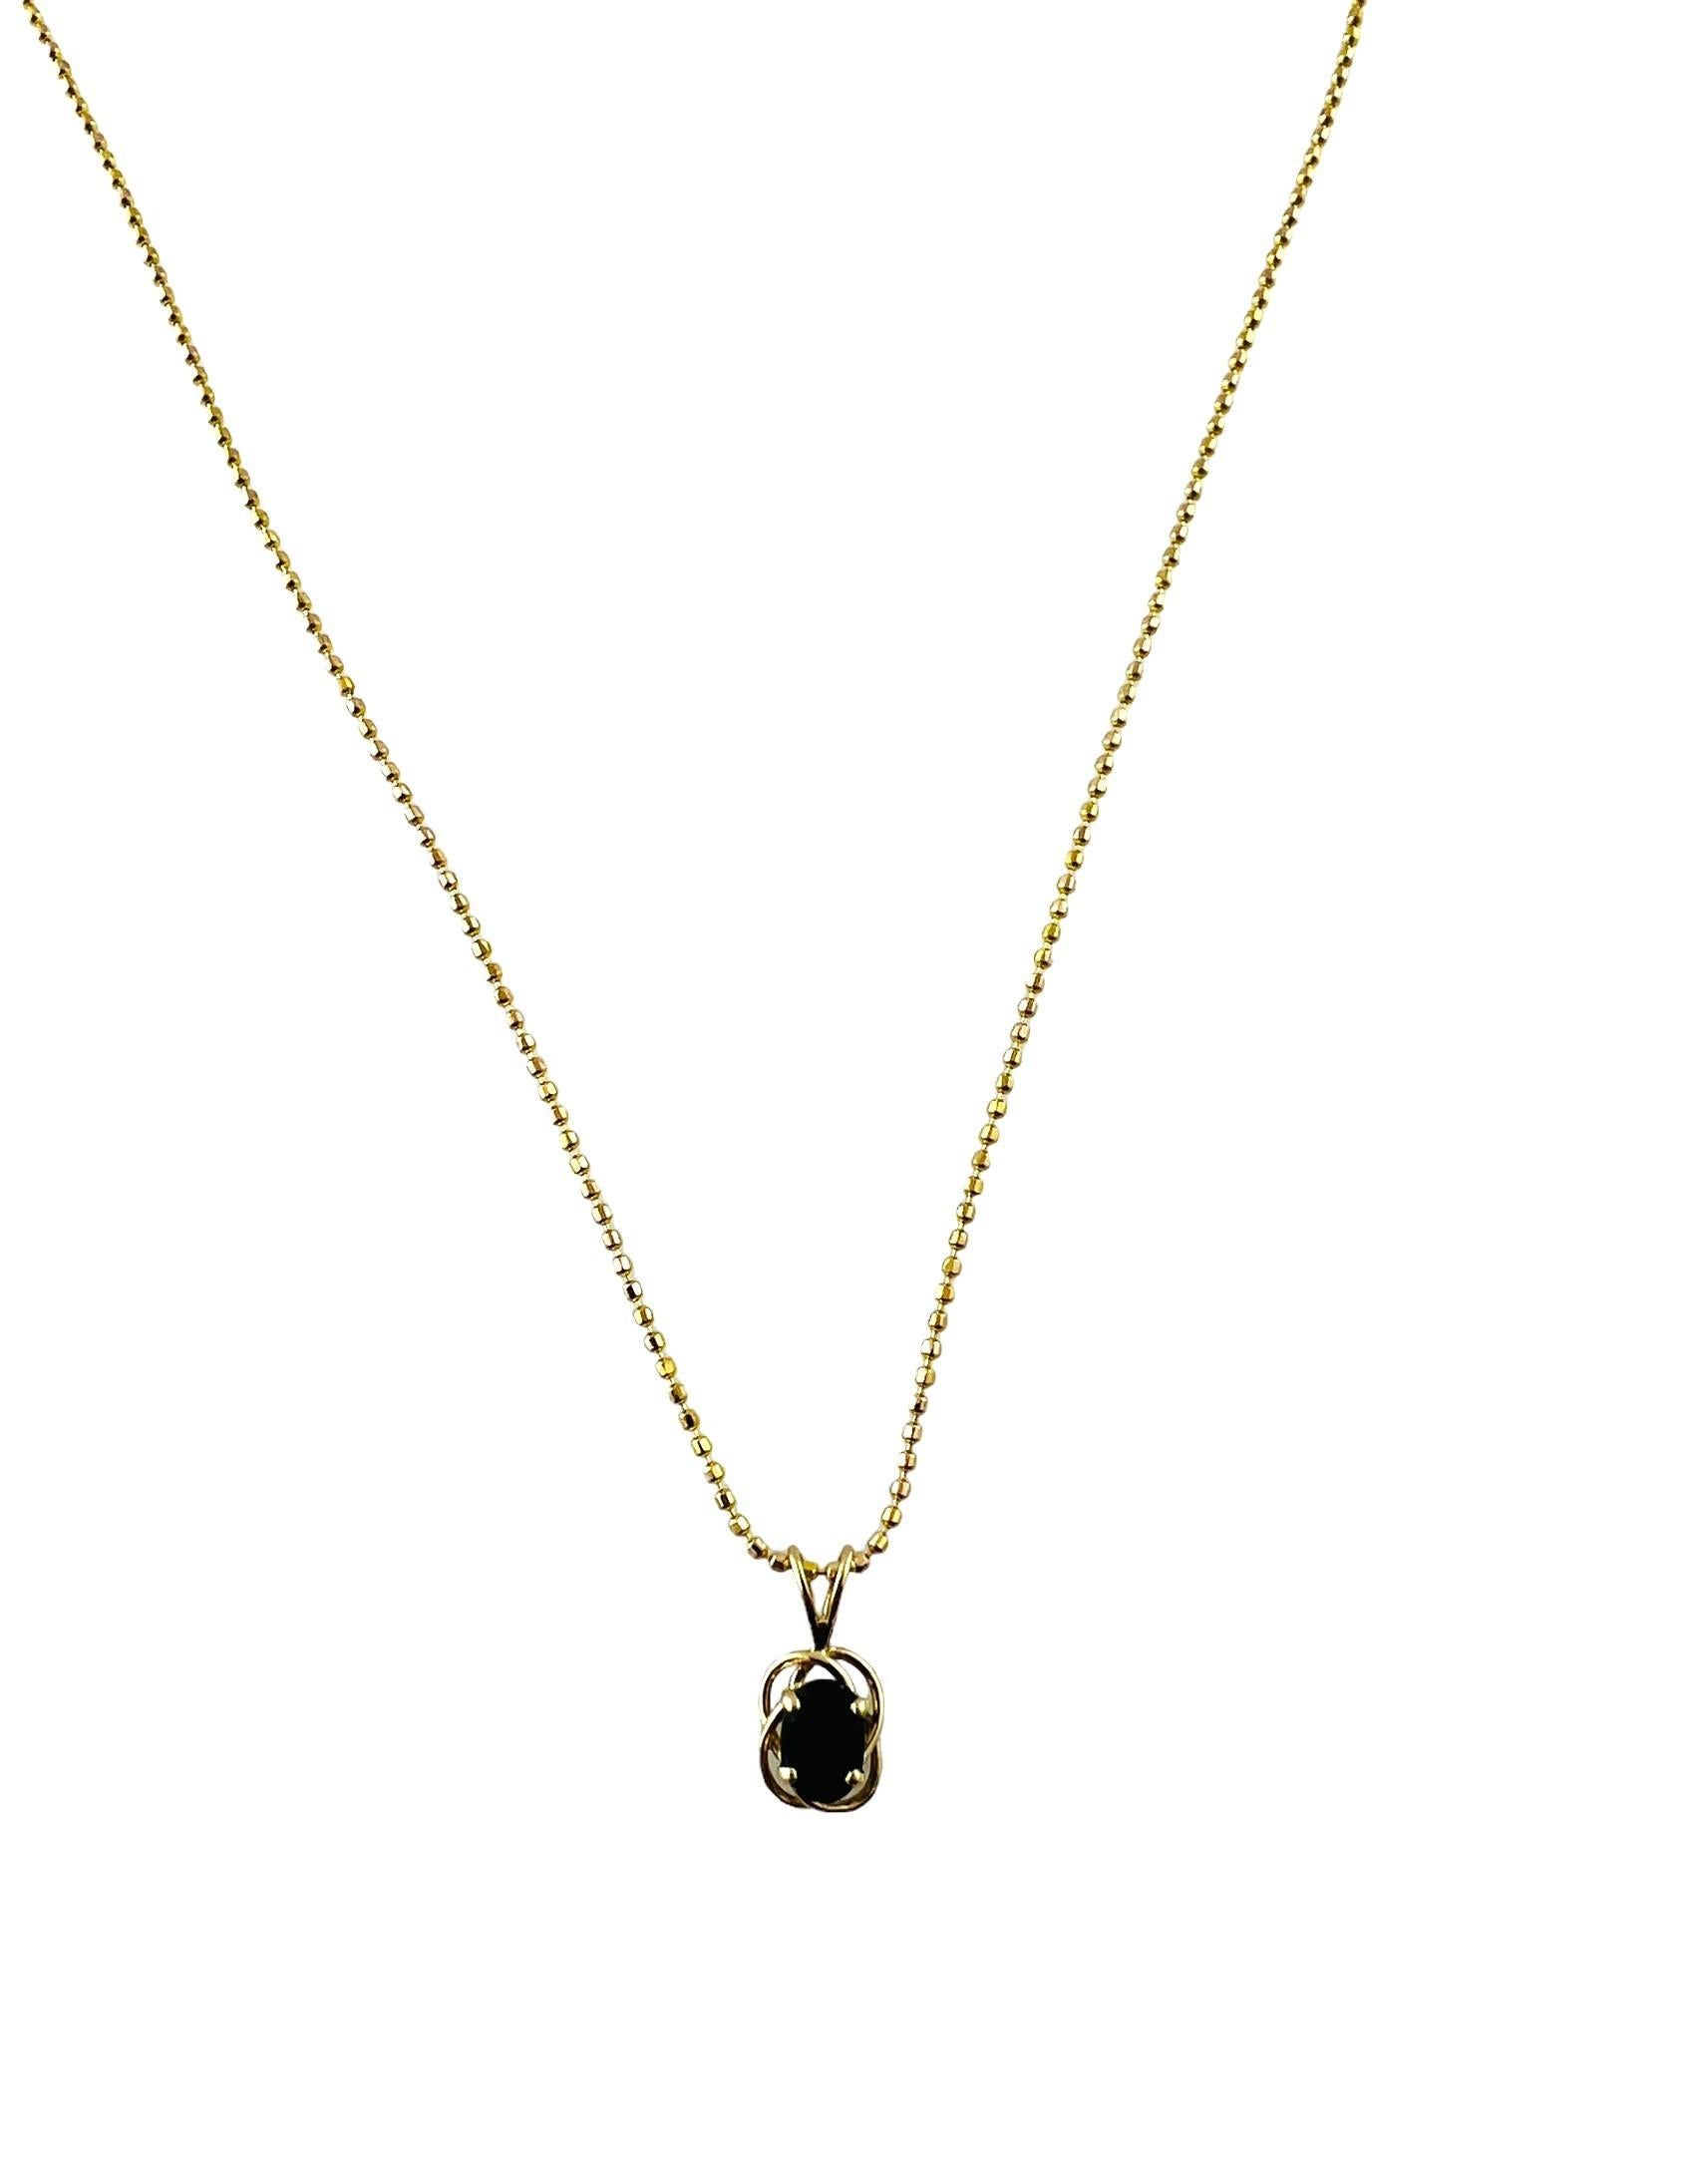 Oval Cut 14K Yellow Gold Bead Chain Oval Natural Sapphire Pendant Necklace #15625 For Sale